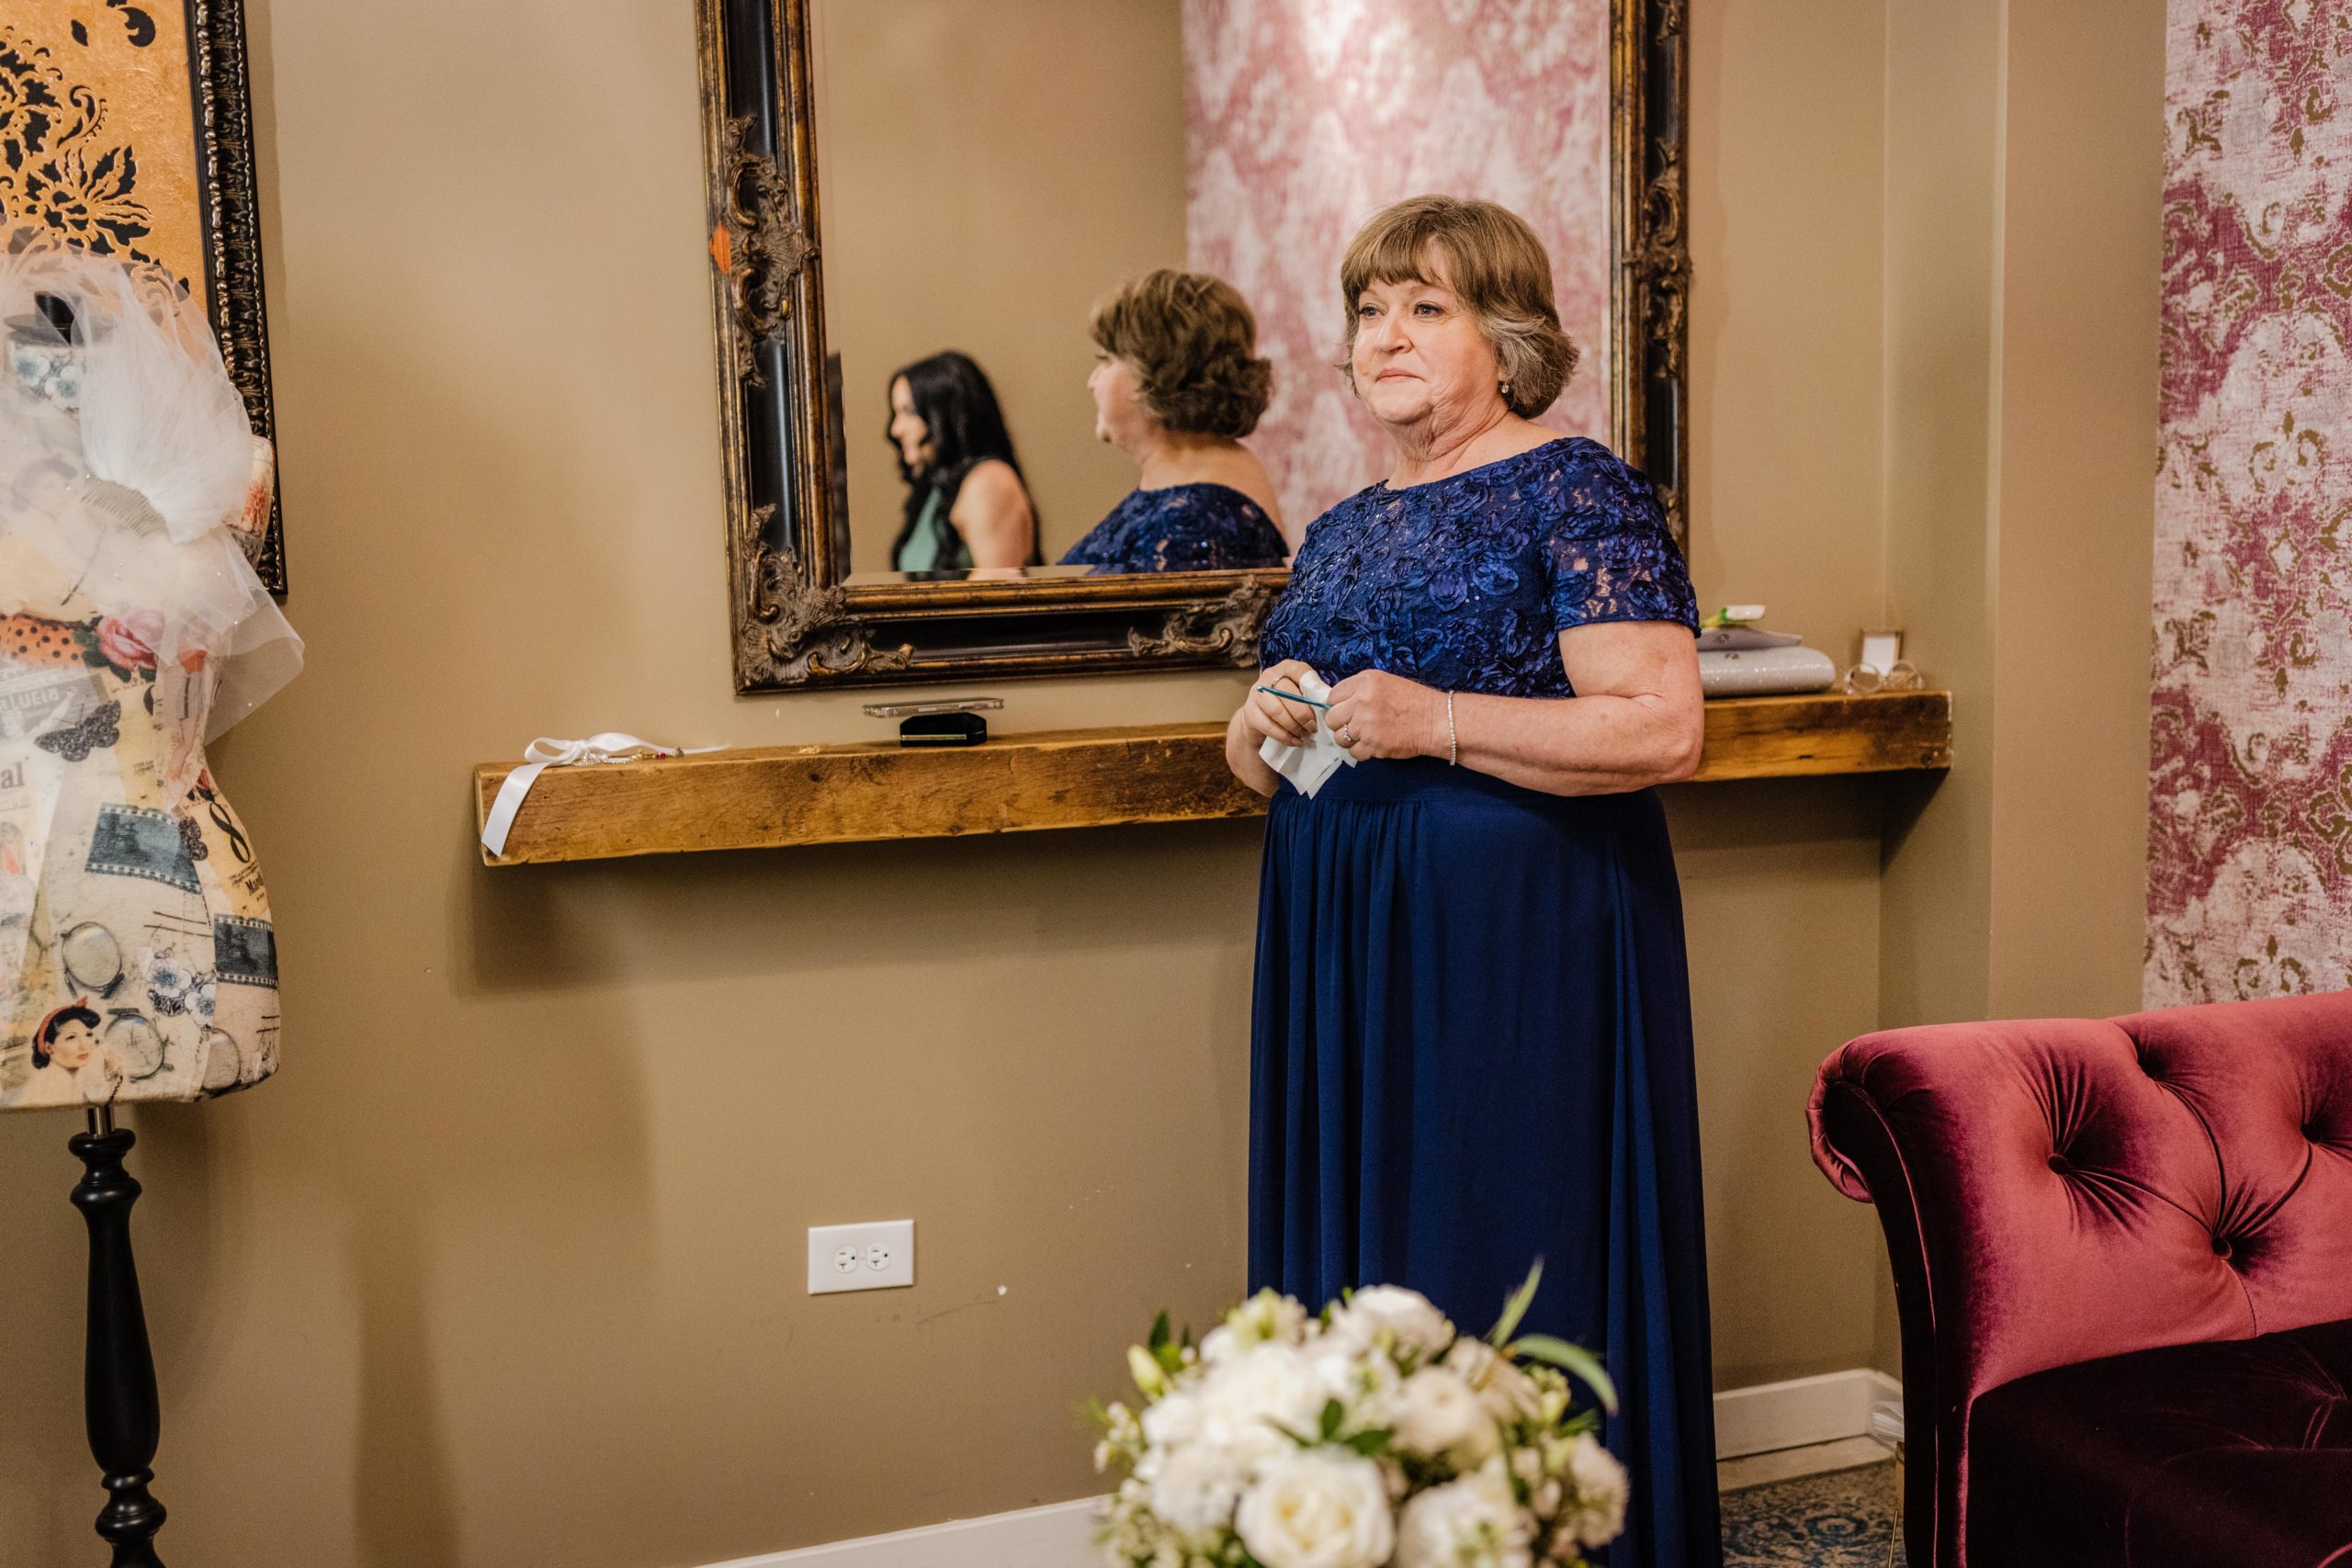 Mom watching the bride get ready at the joinery